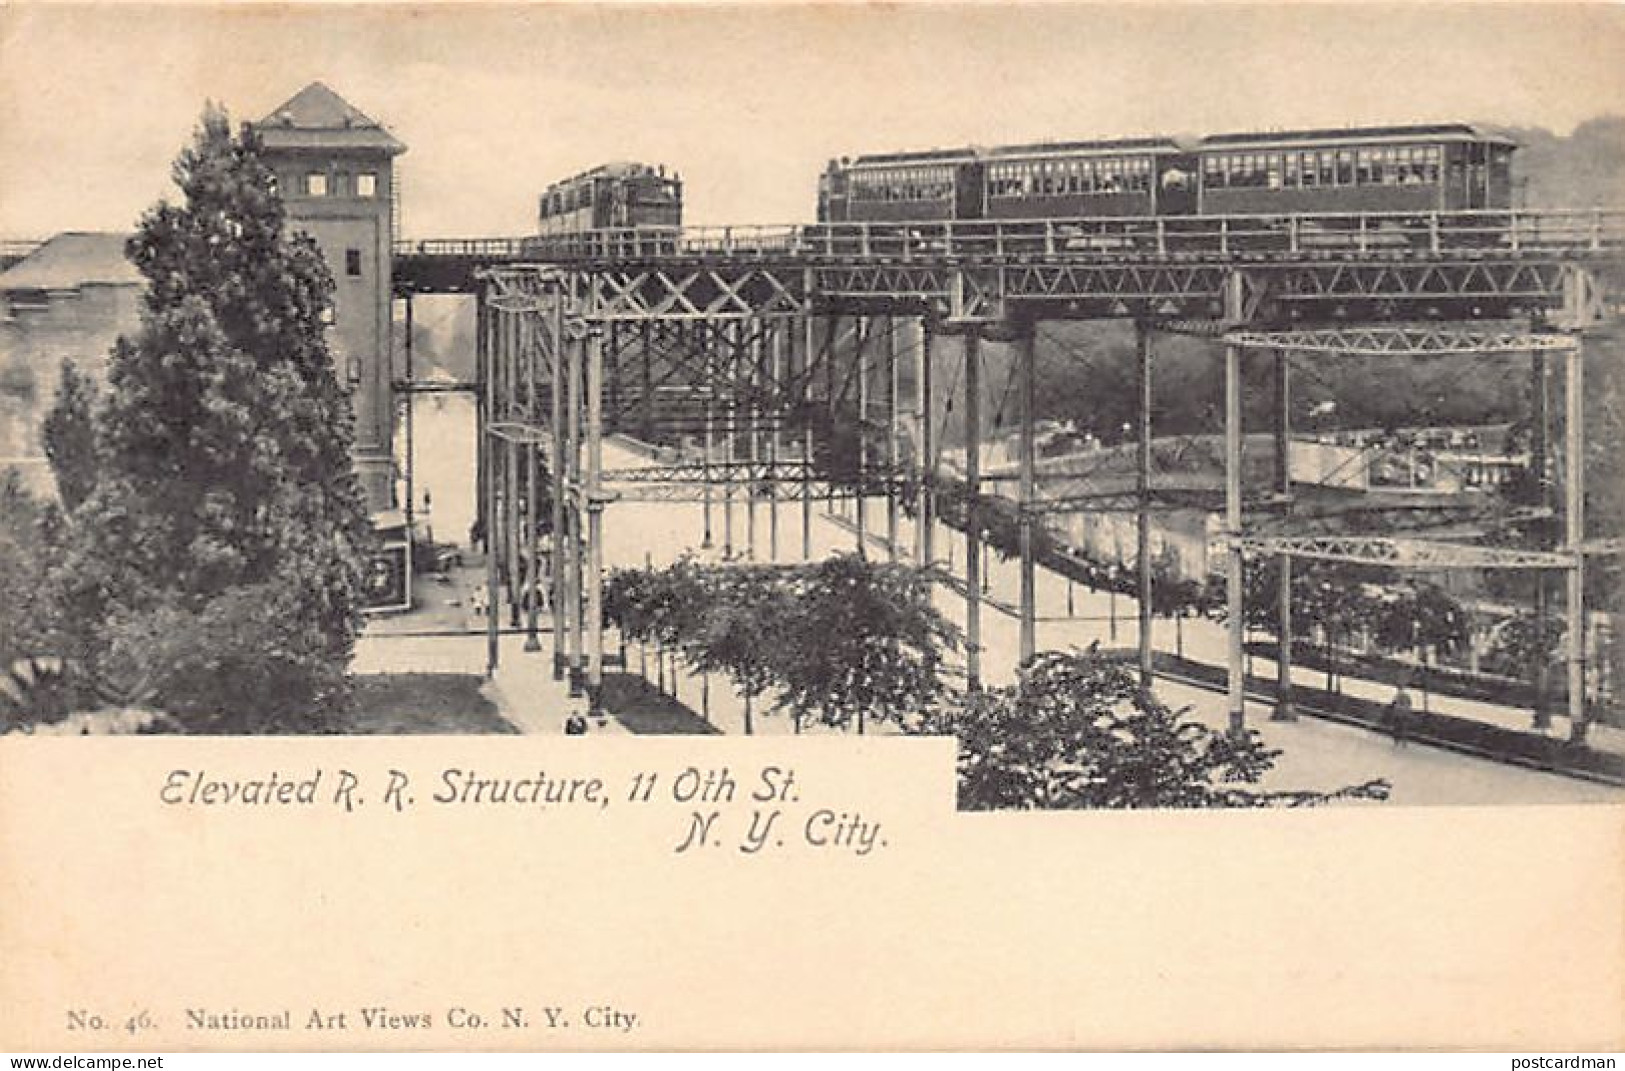 NEW YORK CITY - Elevated Railroad Structure, 110th Street - Publ. National Art Views Co. 46 - Manhattan